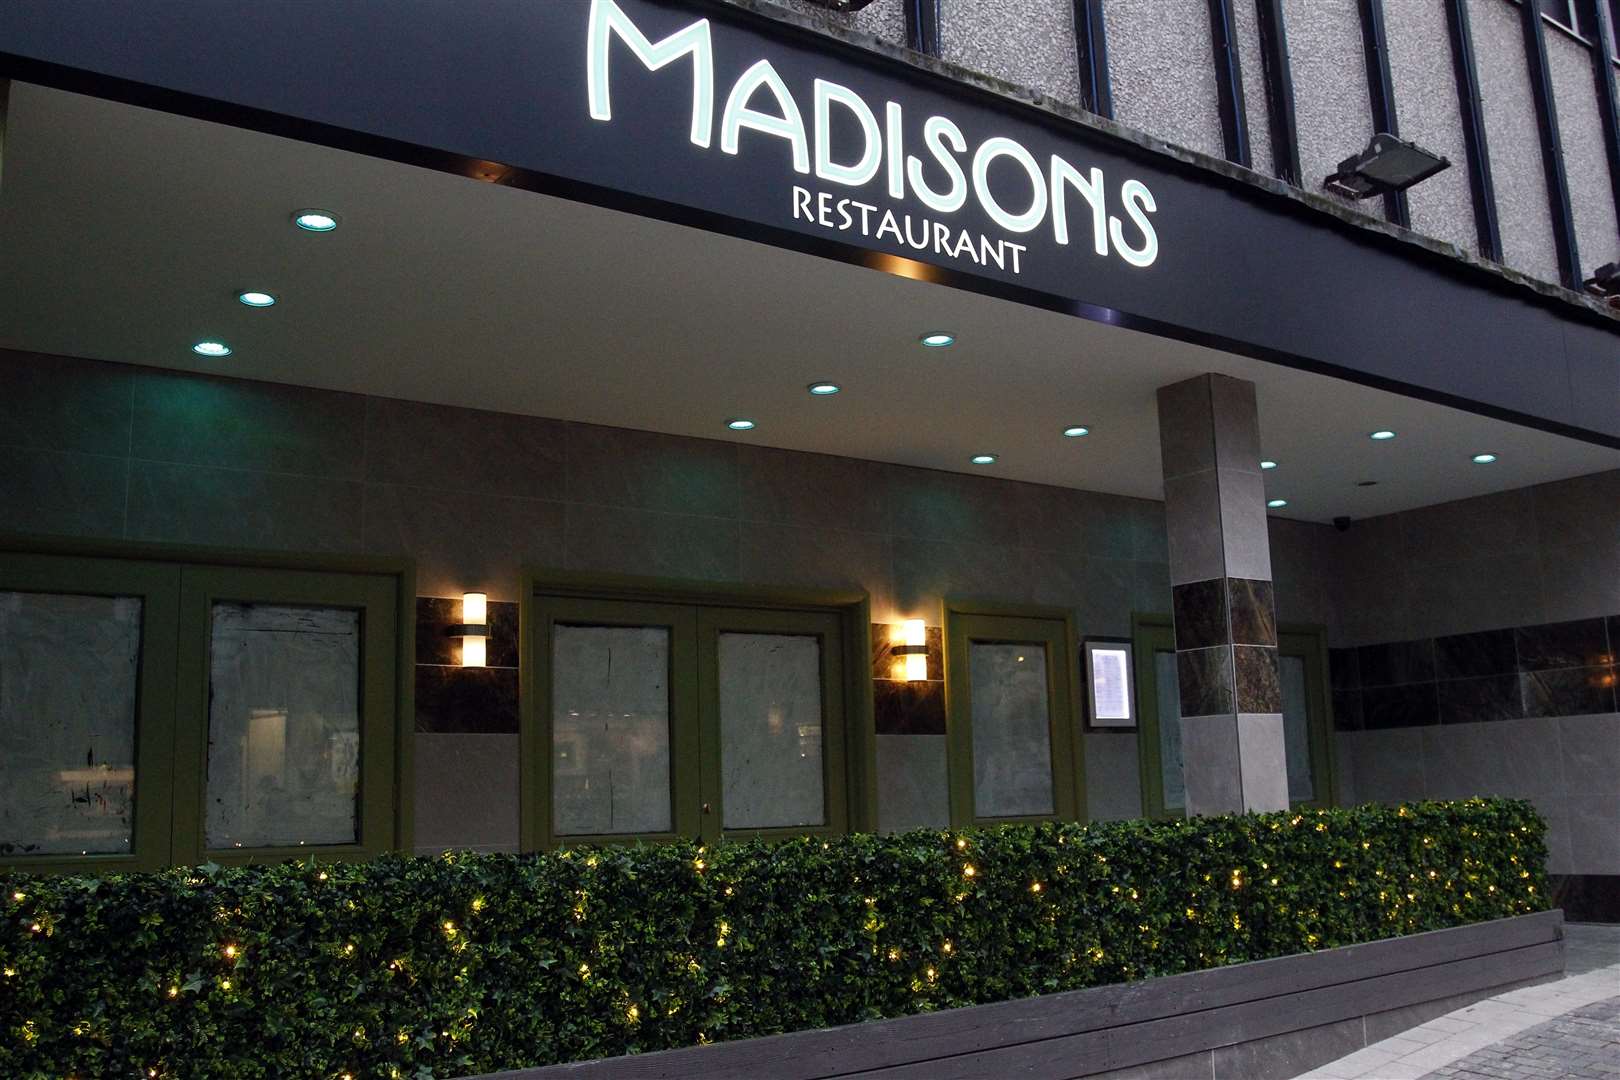 Madisons Restaurant and bar shut without explanation on August 1. Picture: Sean Aidan